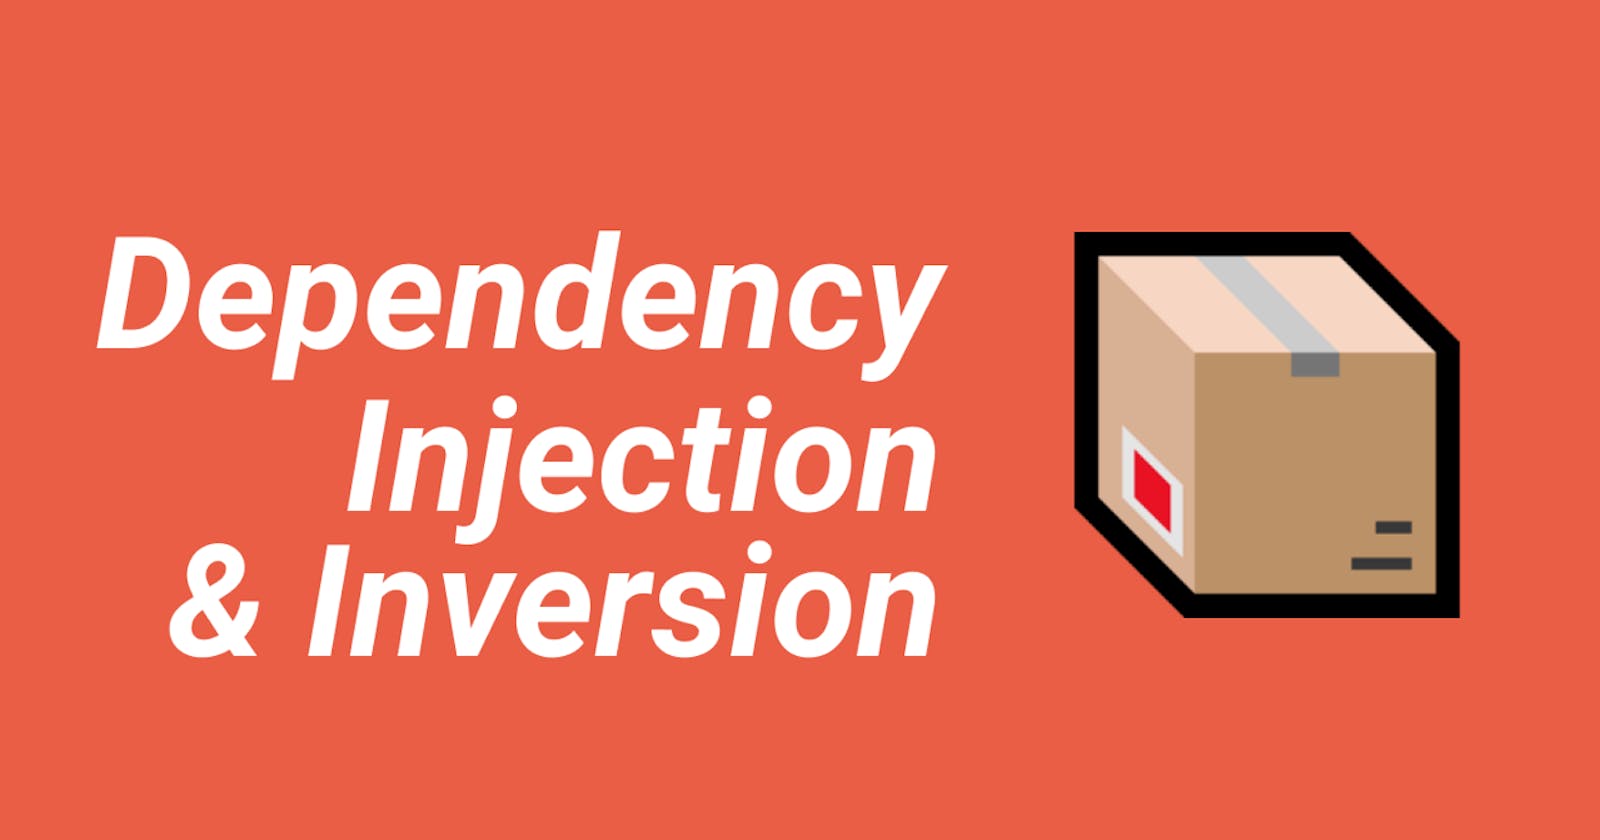 Dependency Injection VS Dependency Inversion